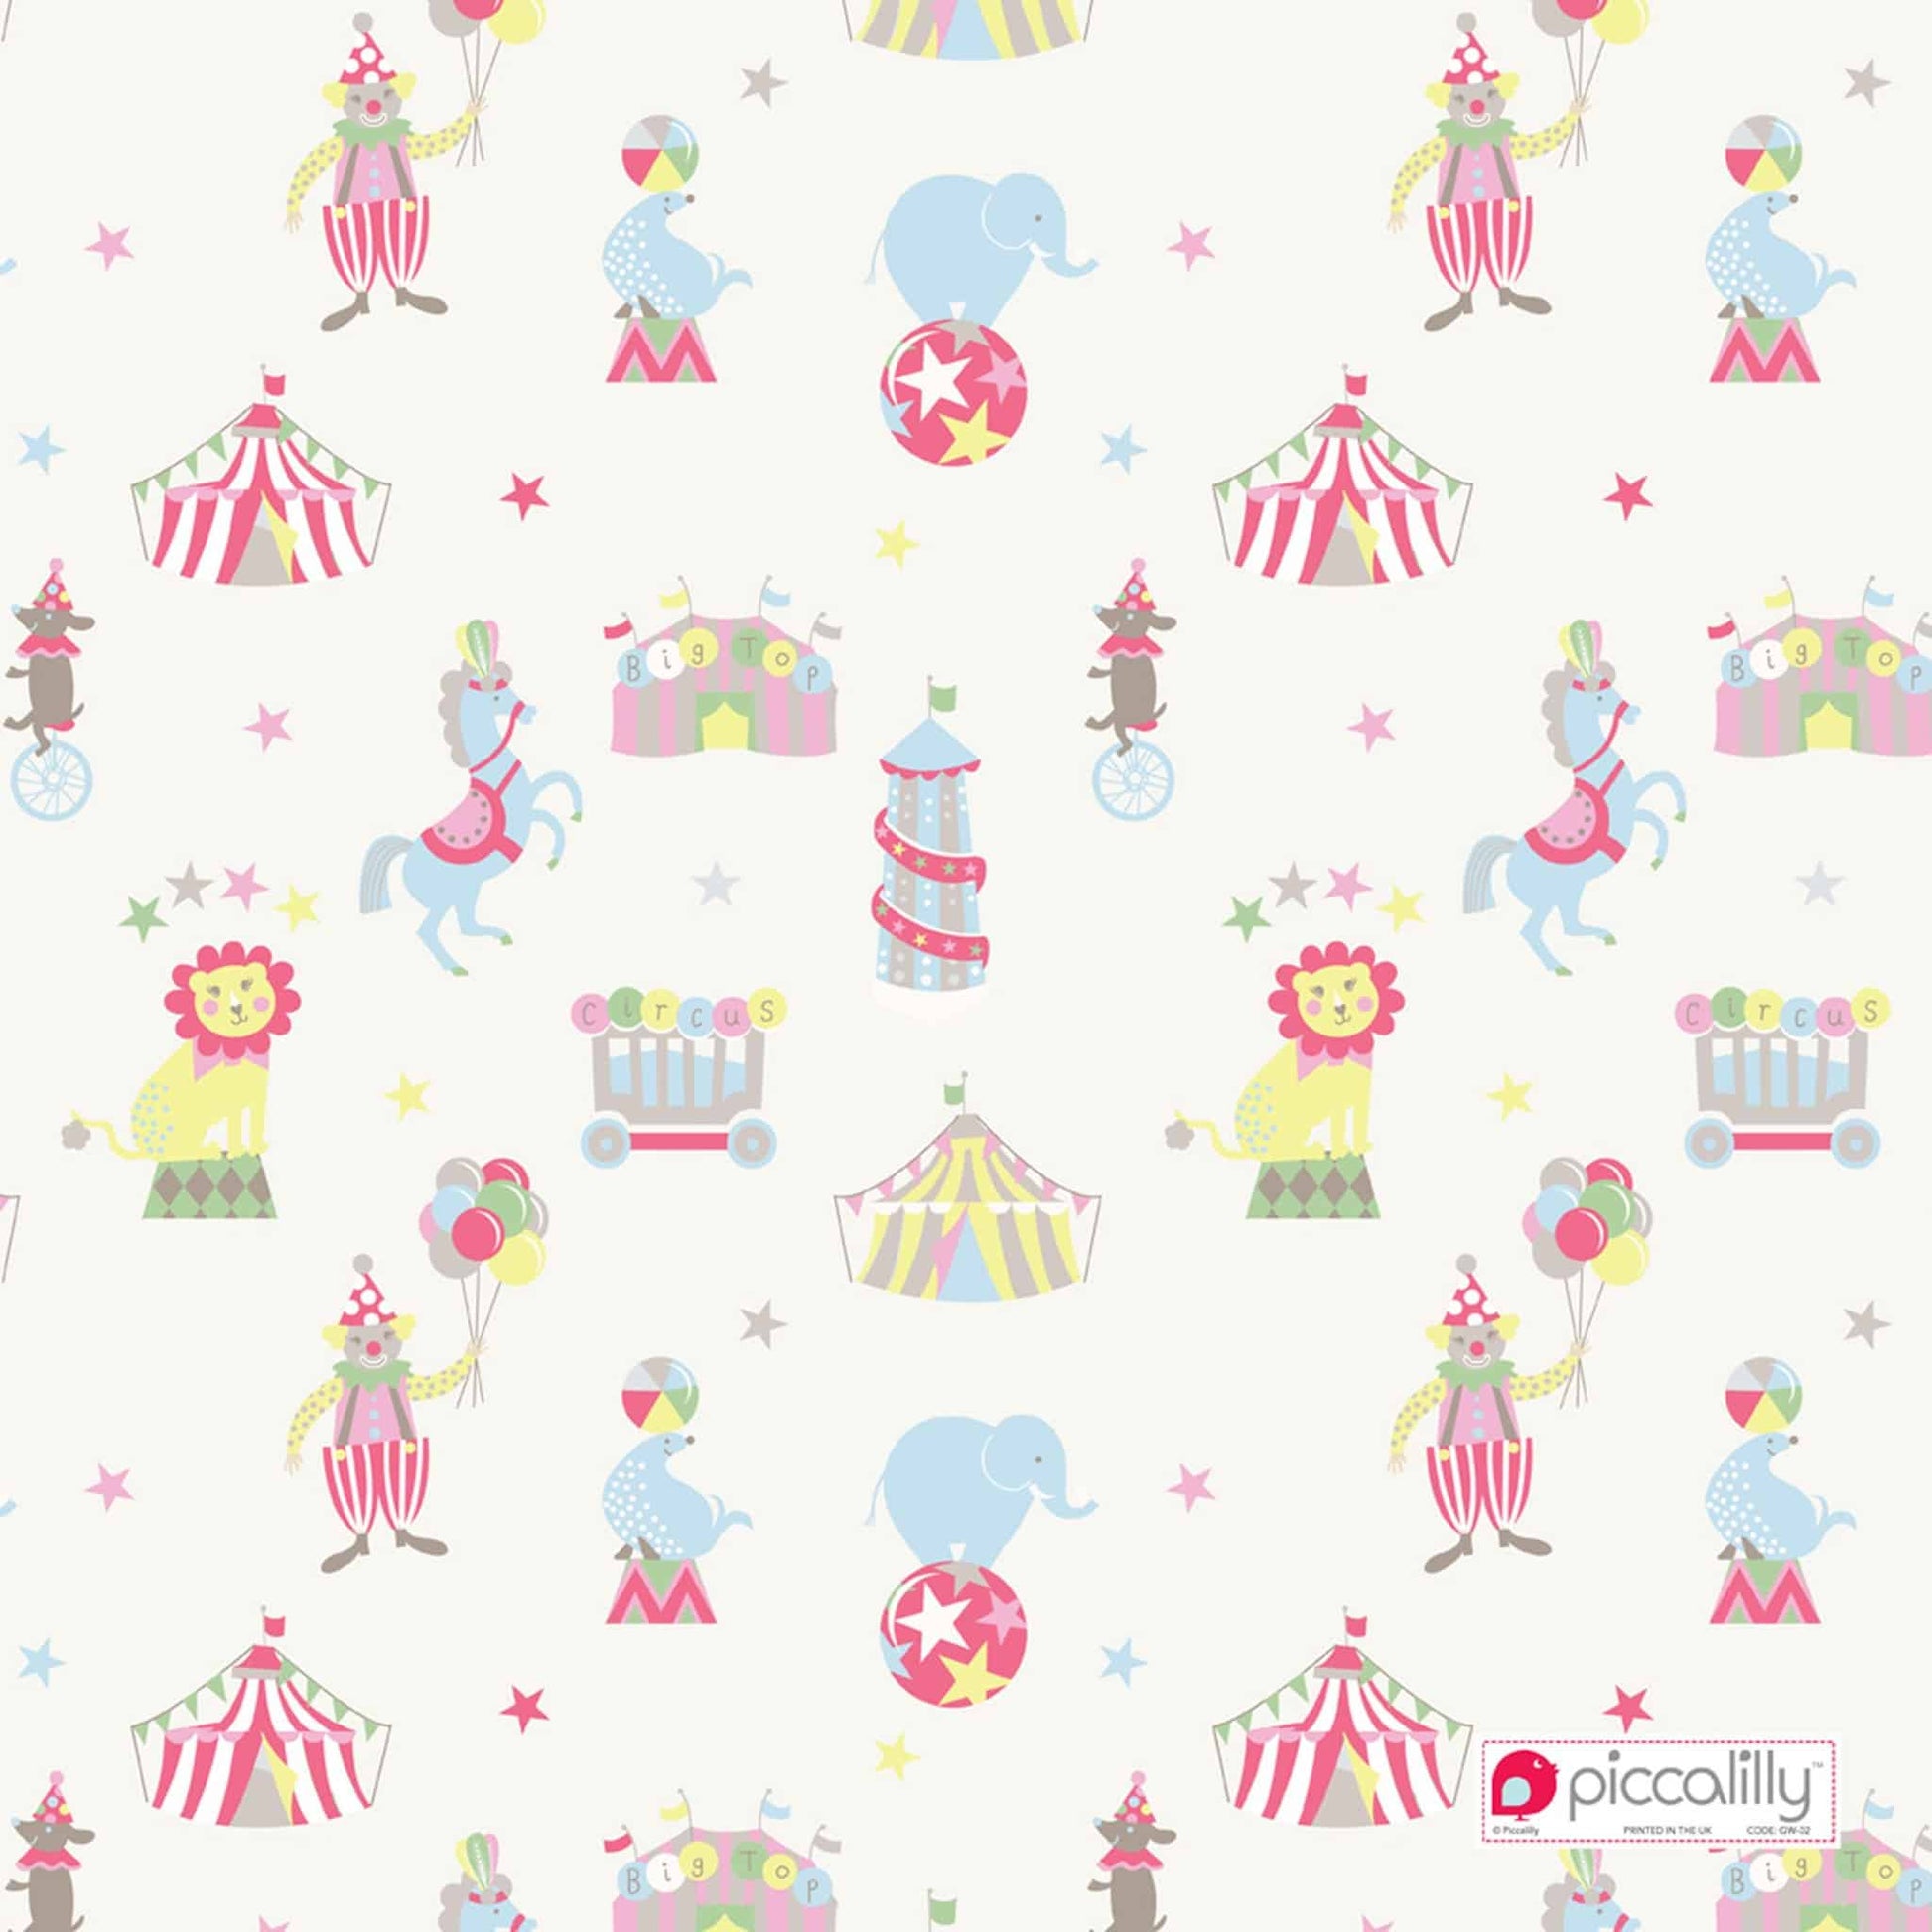 Piccalilly Gift Wrap Funfair